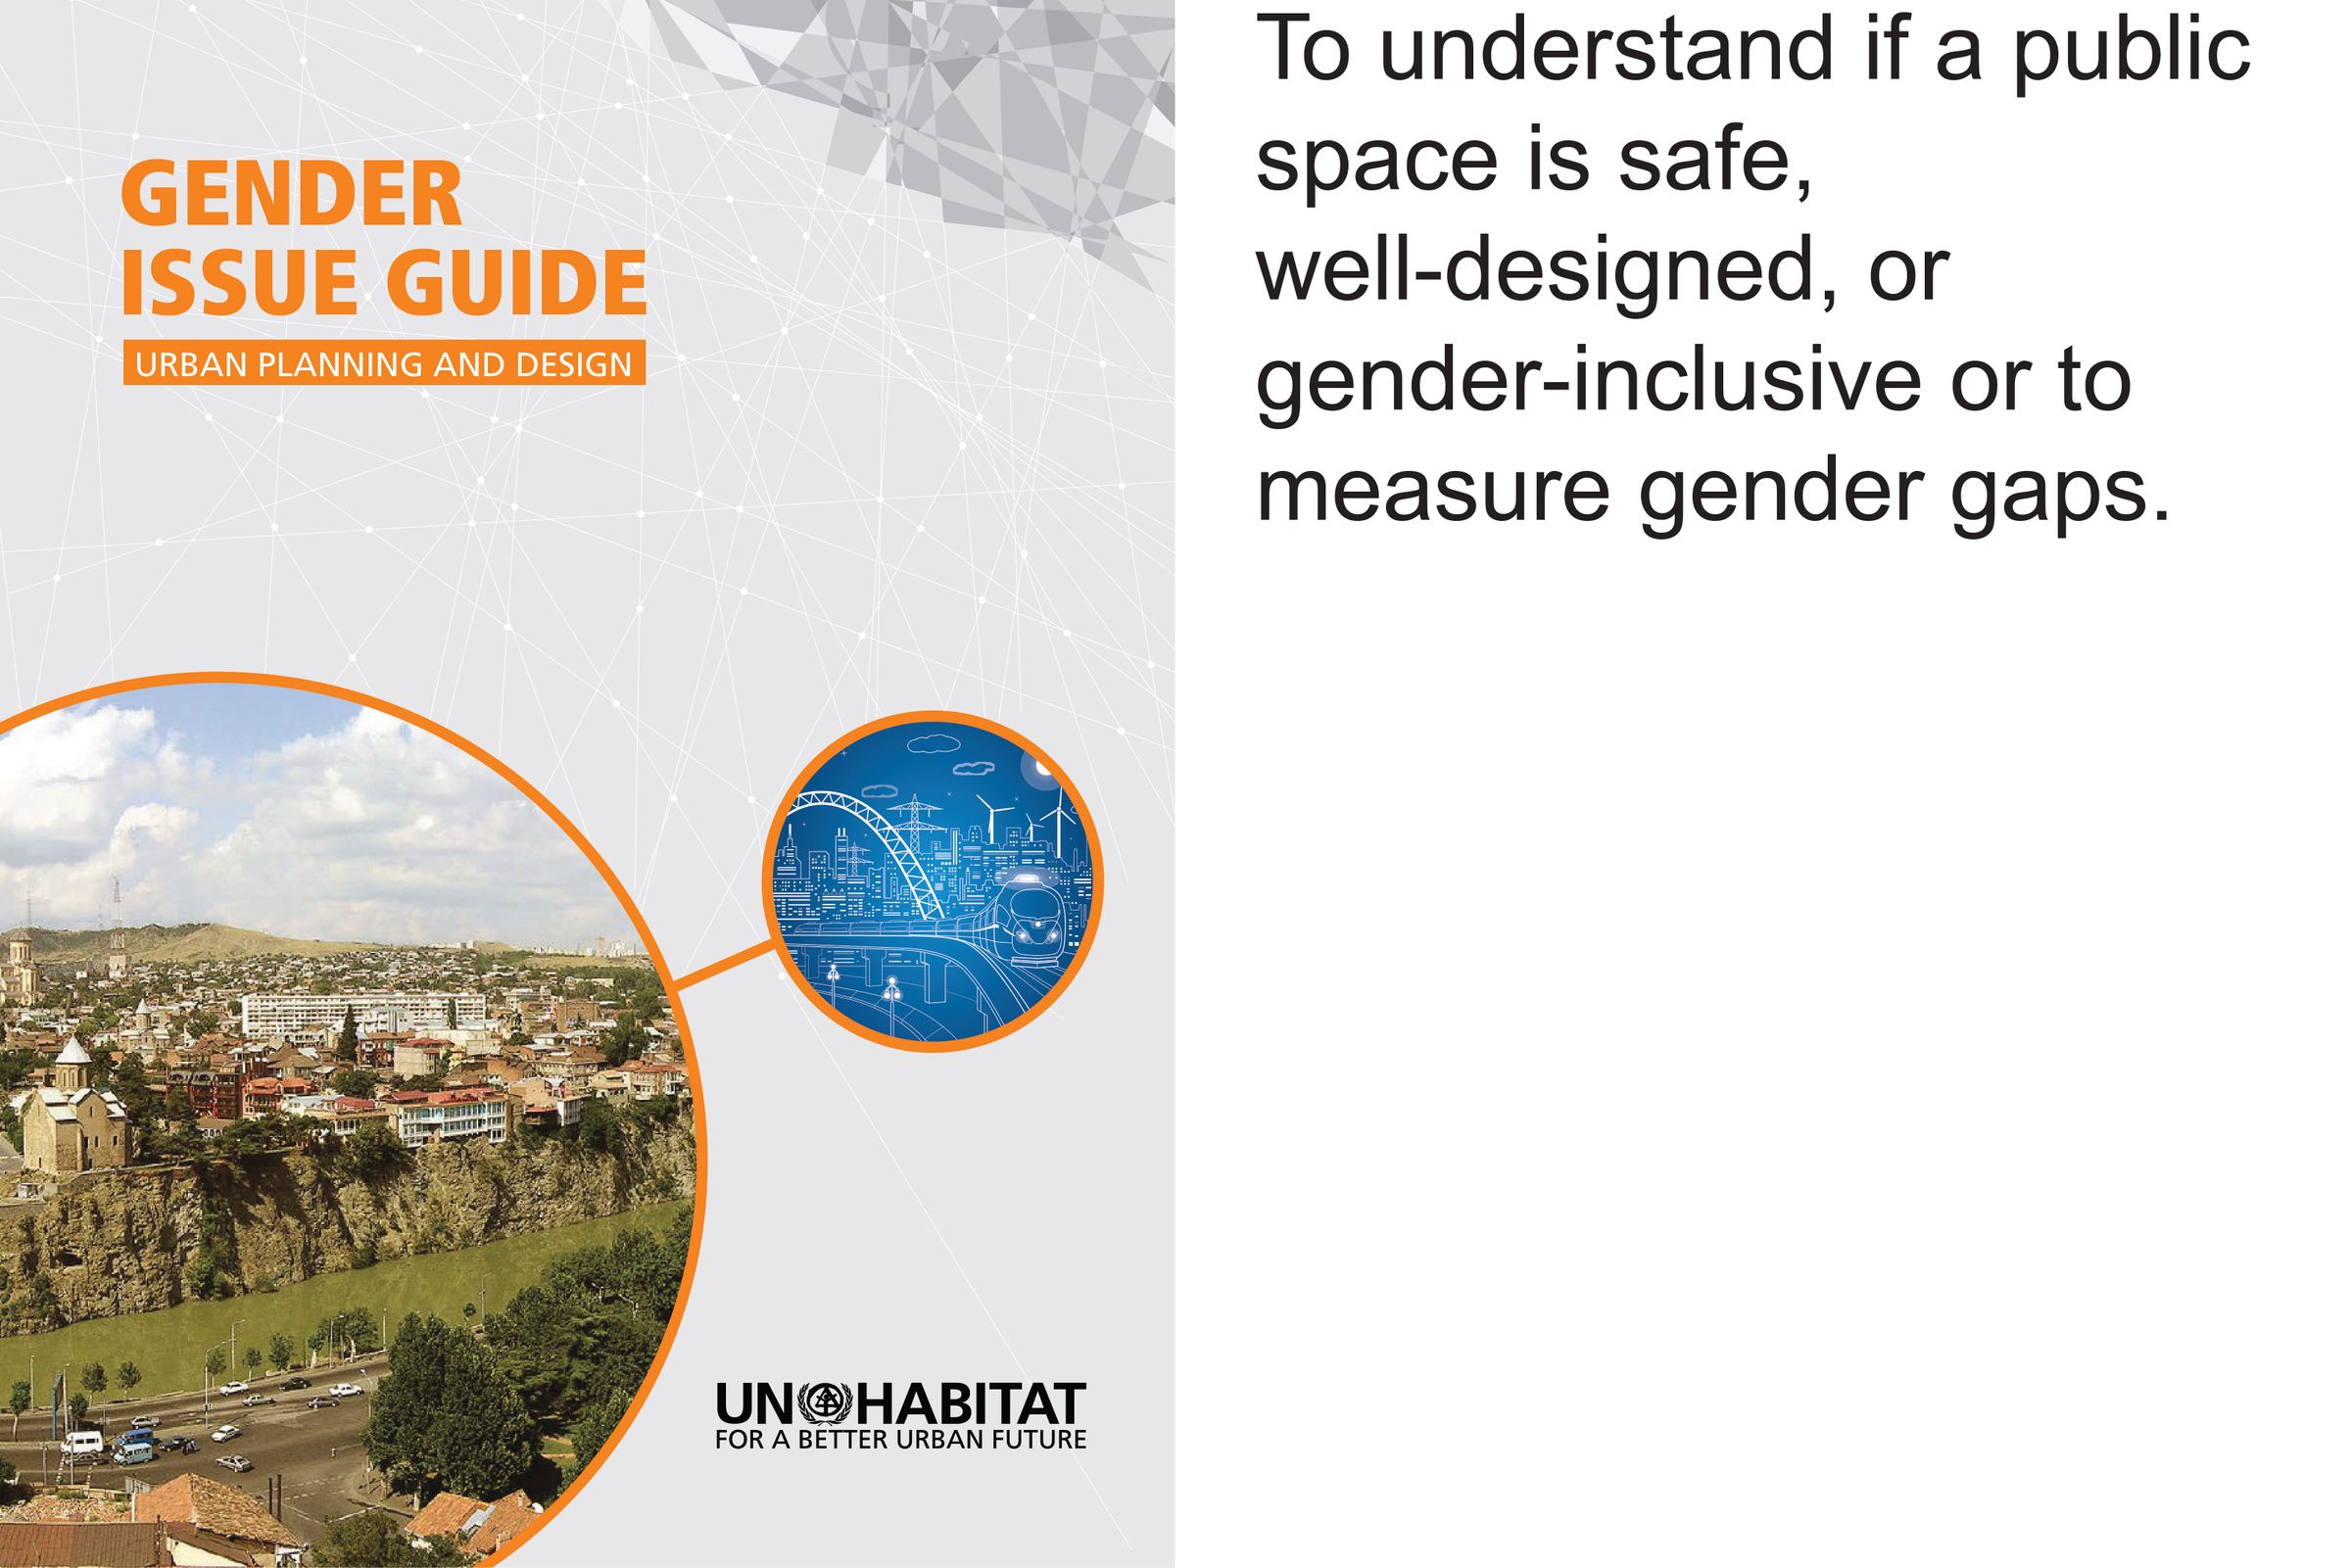 Public Space Gender Auditing (of policies, processes, or projects) to understand if a public space is safe, well-designed, or gender-inclusive or to measure gender gaps.